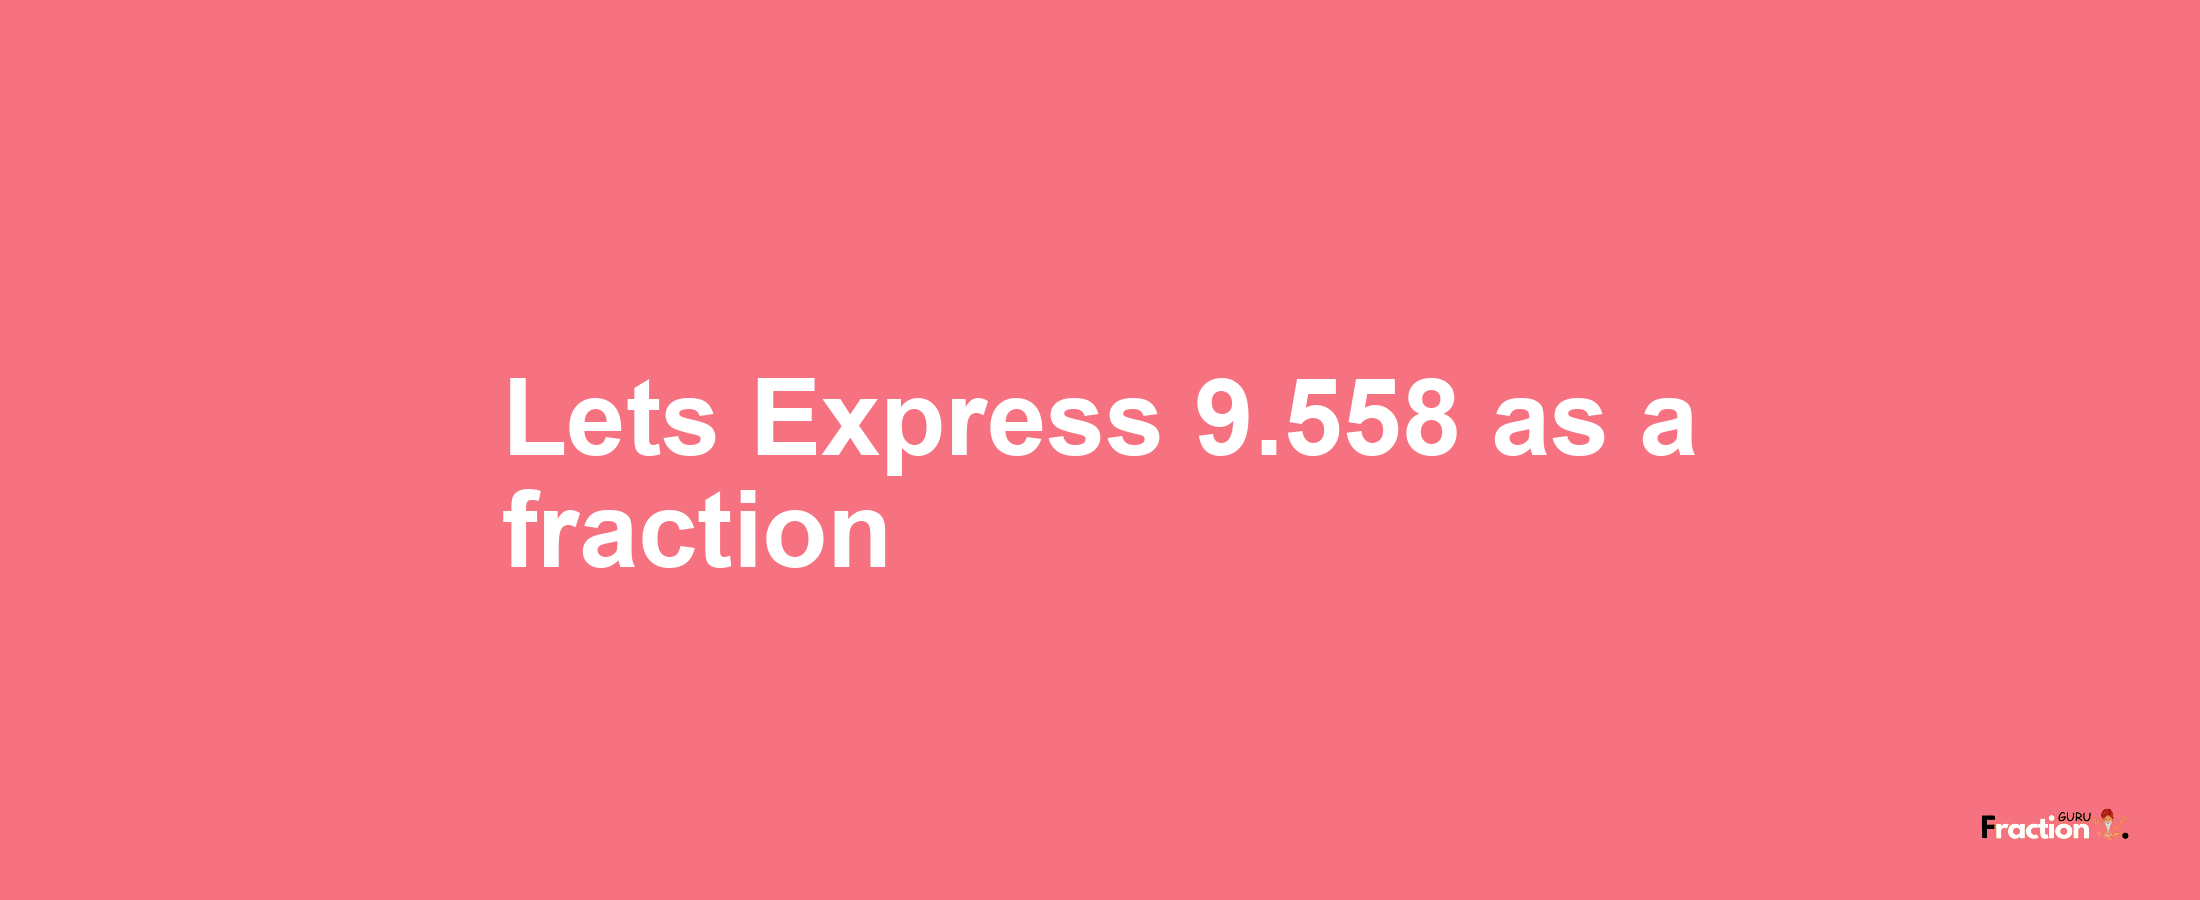 Lets Express 9.558 as afraction